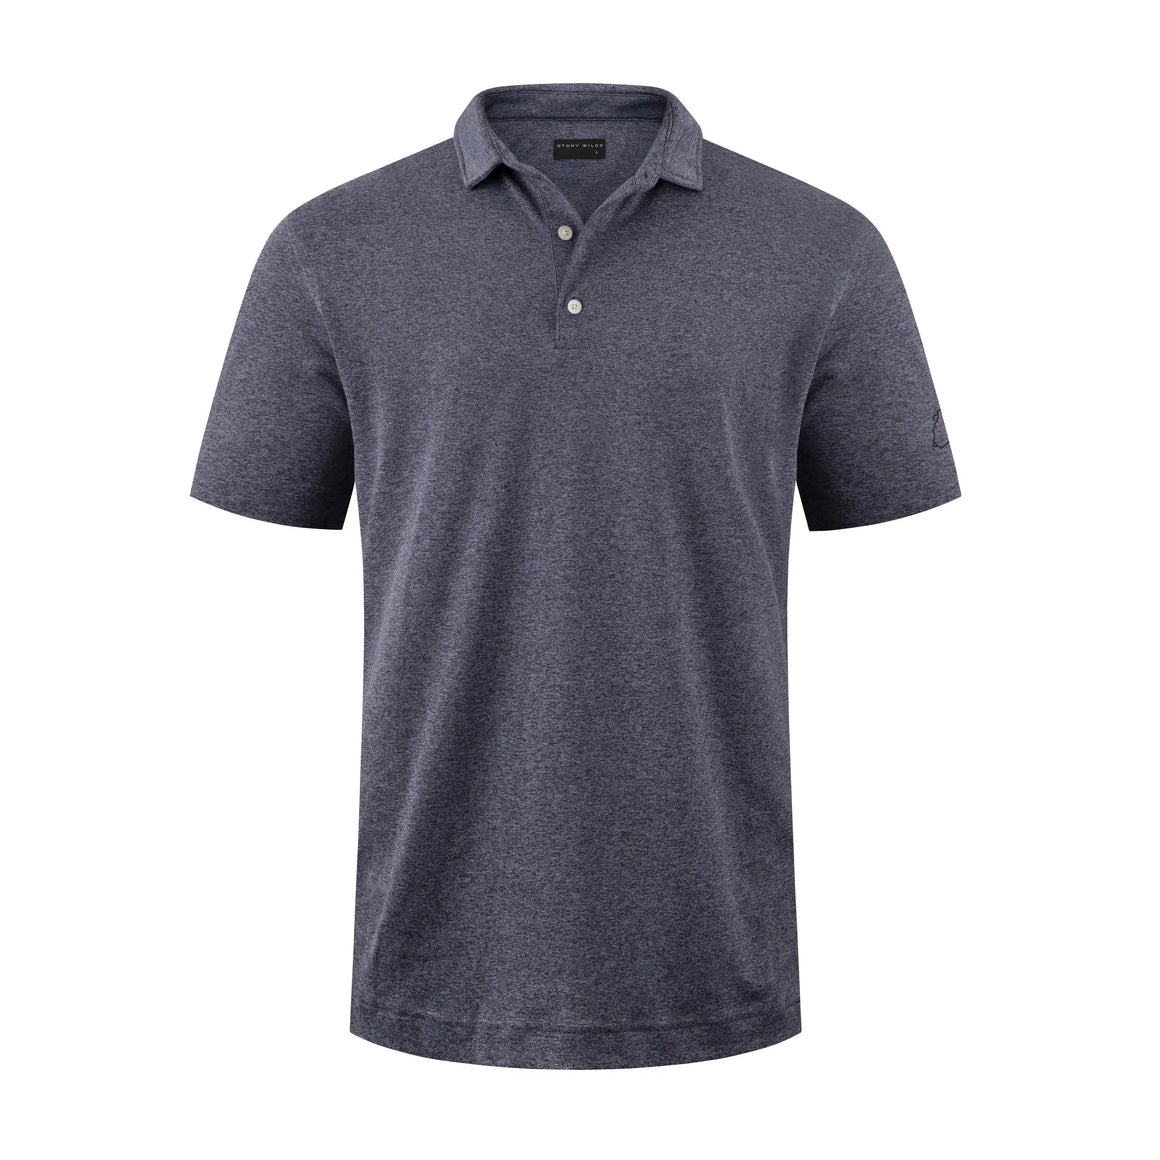 THE ROADS POLO - MAGNET GREY-MENS T-SHIRTS & POLO'S-STONY WILDS-JB Evans Fashions & Footwear